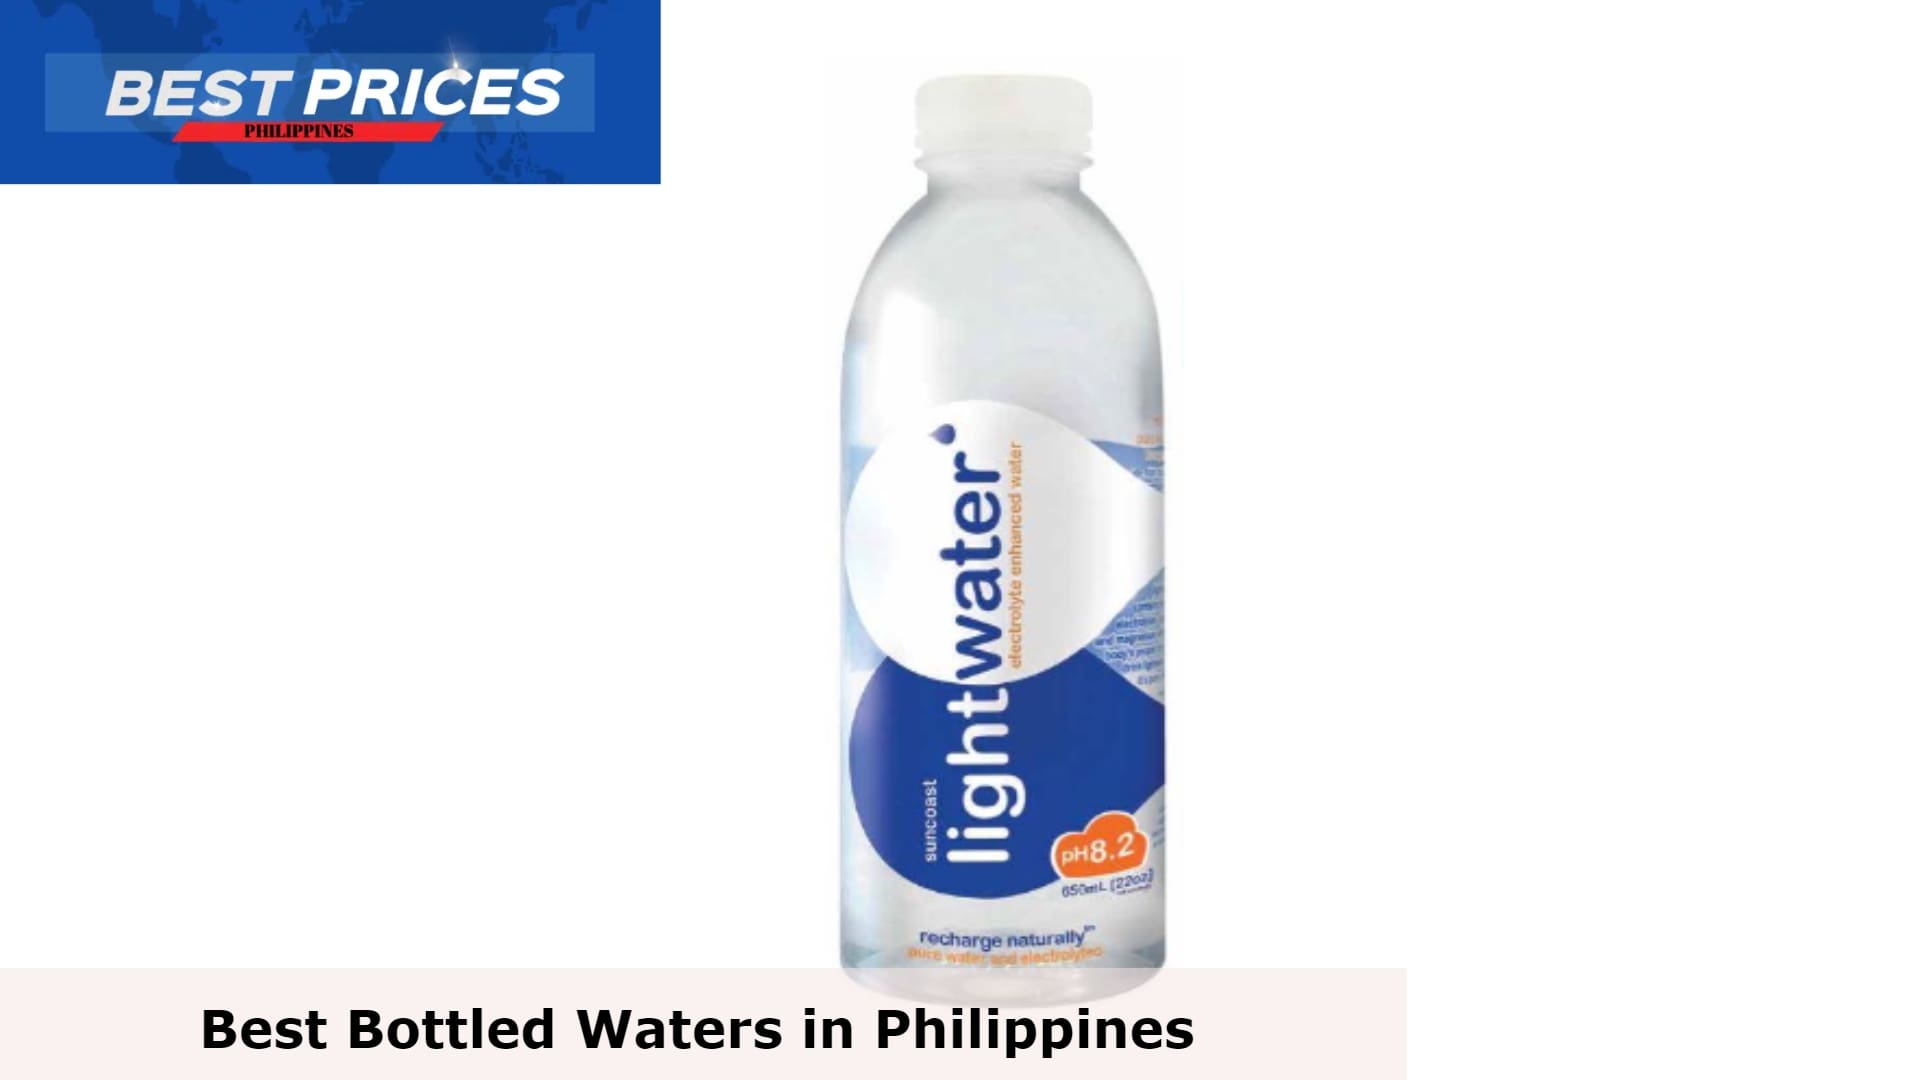 Suncoast Lightwater Electrolyte Enhanced Water - Bottled Water Philippines, What is the best bottled water in the Philippines?, list of mineral water brands in the philippines, bottled water philippines price, best bottled water philippines, cheapest bottled water philippines, 1 box of bottled water price philippines, wet bottled water price philippines, 1 liter bottled water price philippines, 
nature spring bottled water price, How much is a bottle of water in Philippines?, What is the best distilled water in the Philippines?, What is the top 5 bottled water in the Philippines?, Best pH level for drinking water,